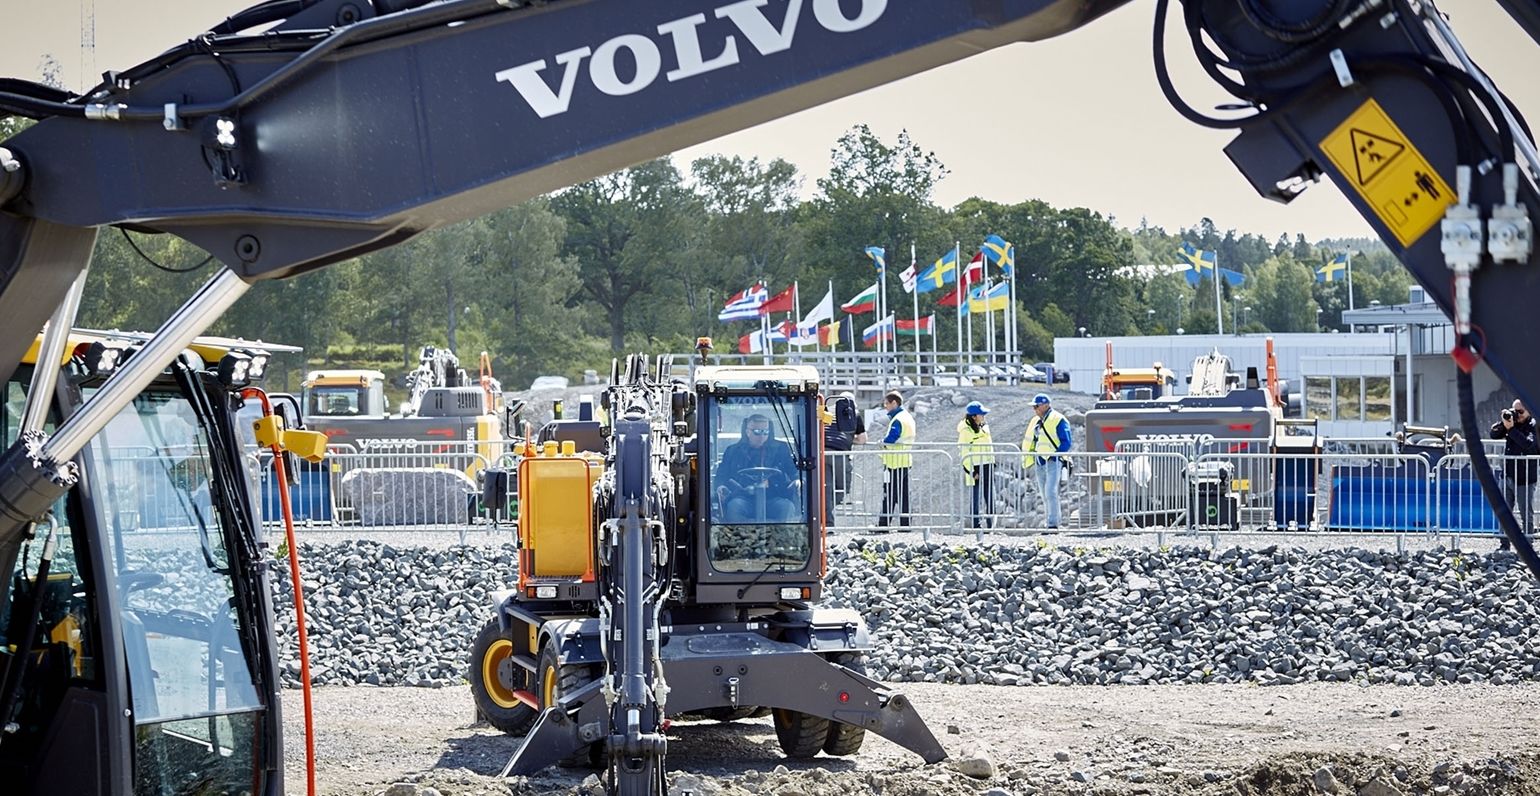 Volvo has not ruled out participation in future bauma events or other tradeshows